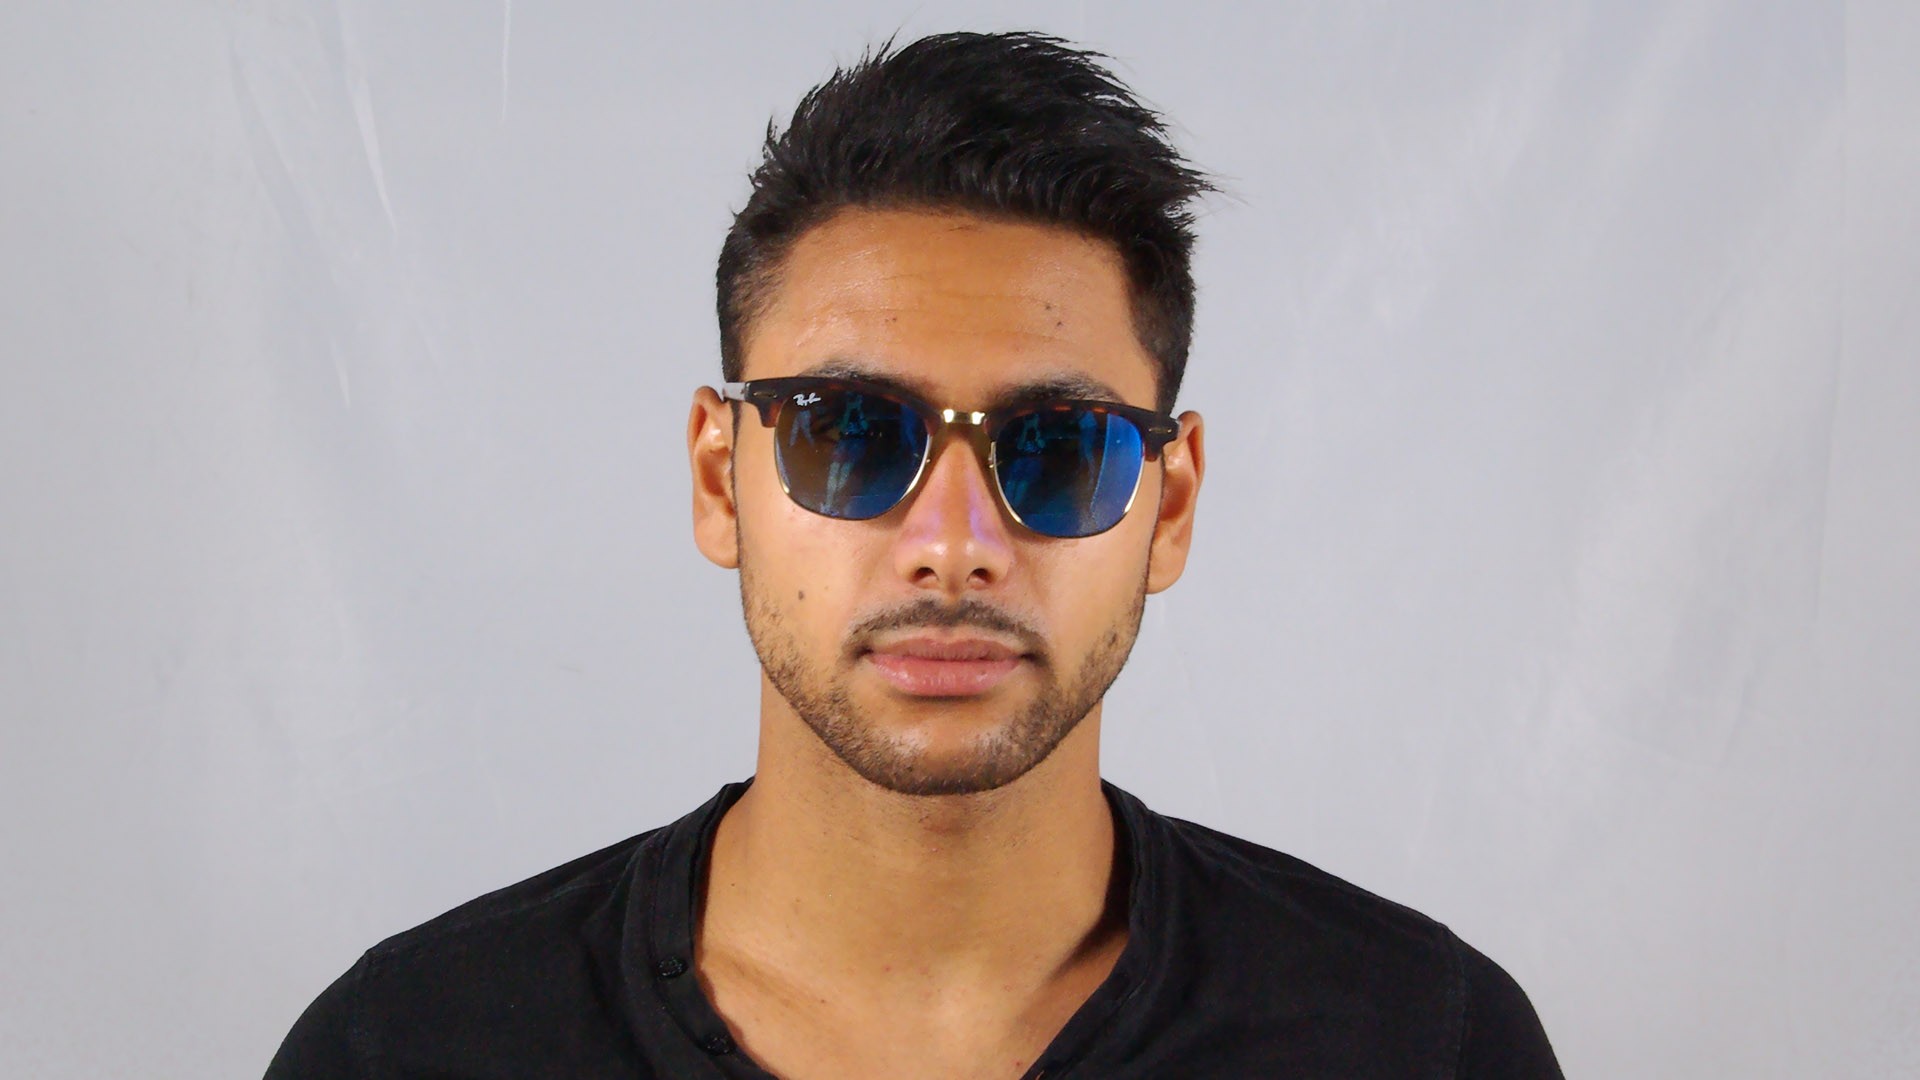 ray ban clubmaster blue